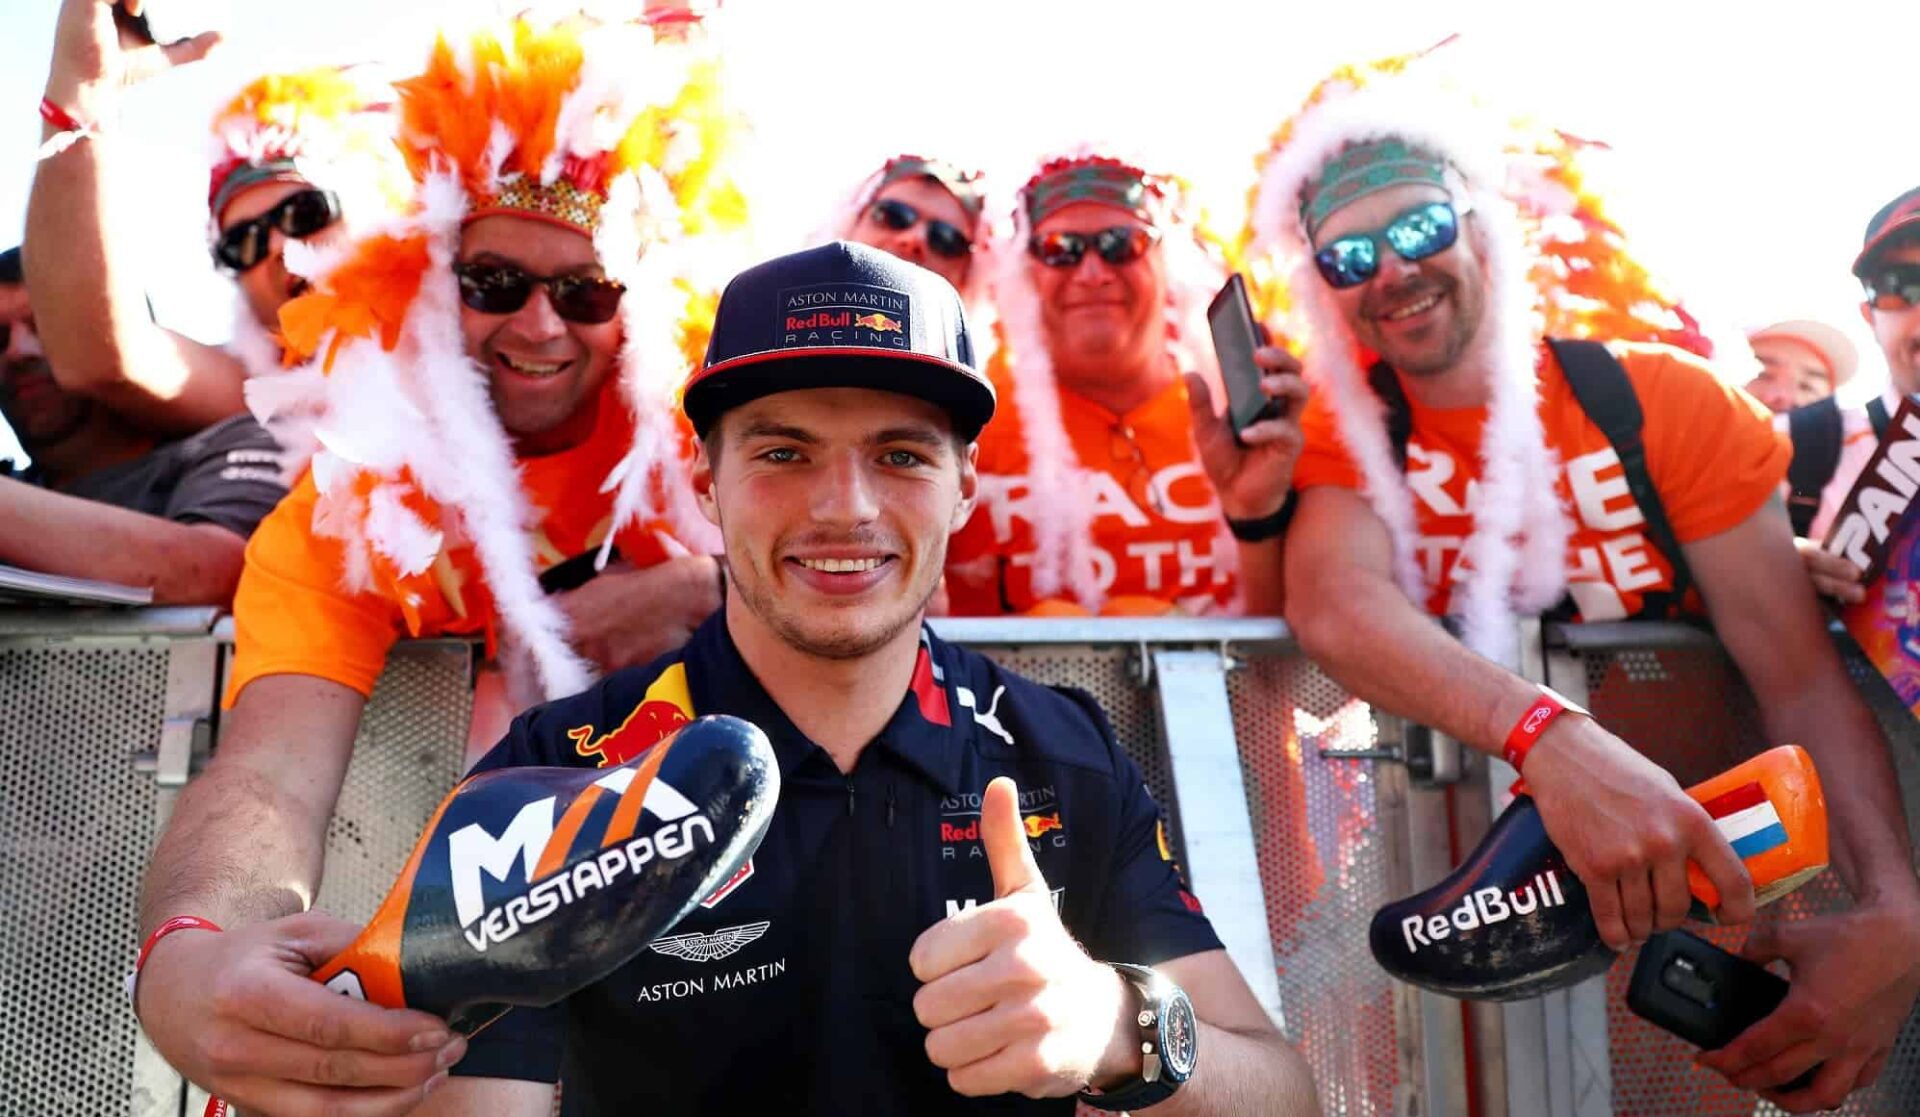 Max Verstappen posing infront of the camera with fans behind him